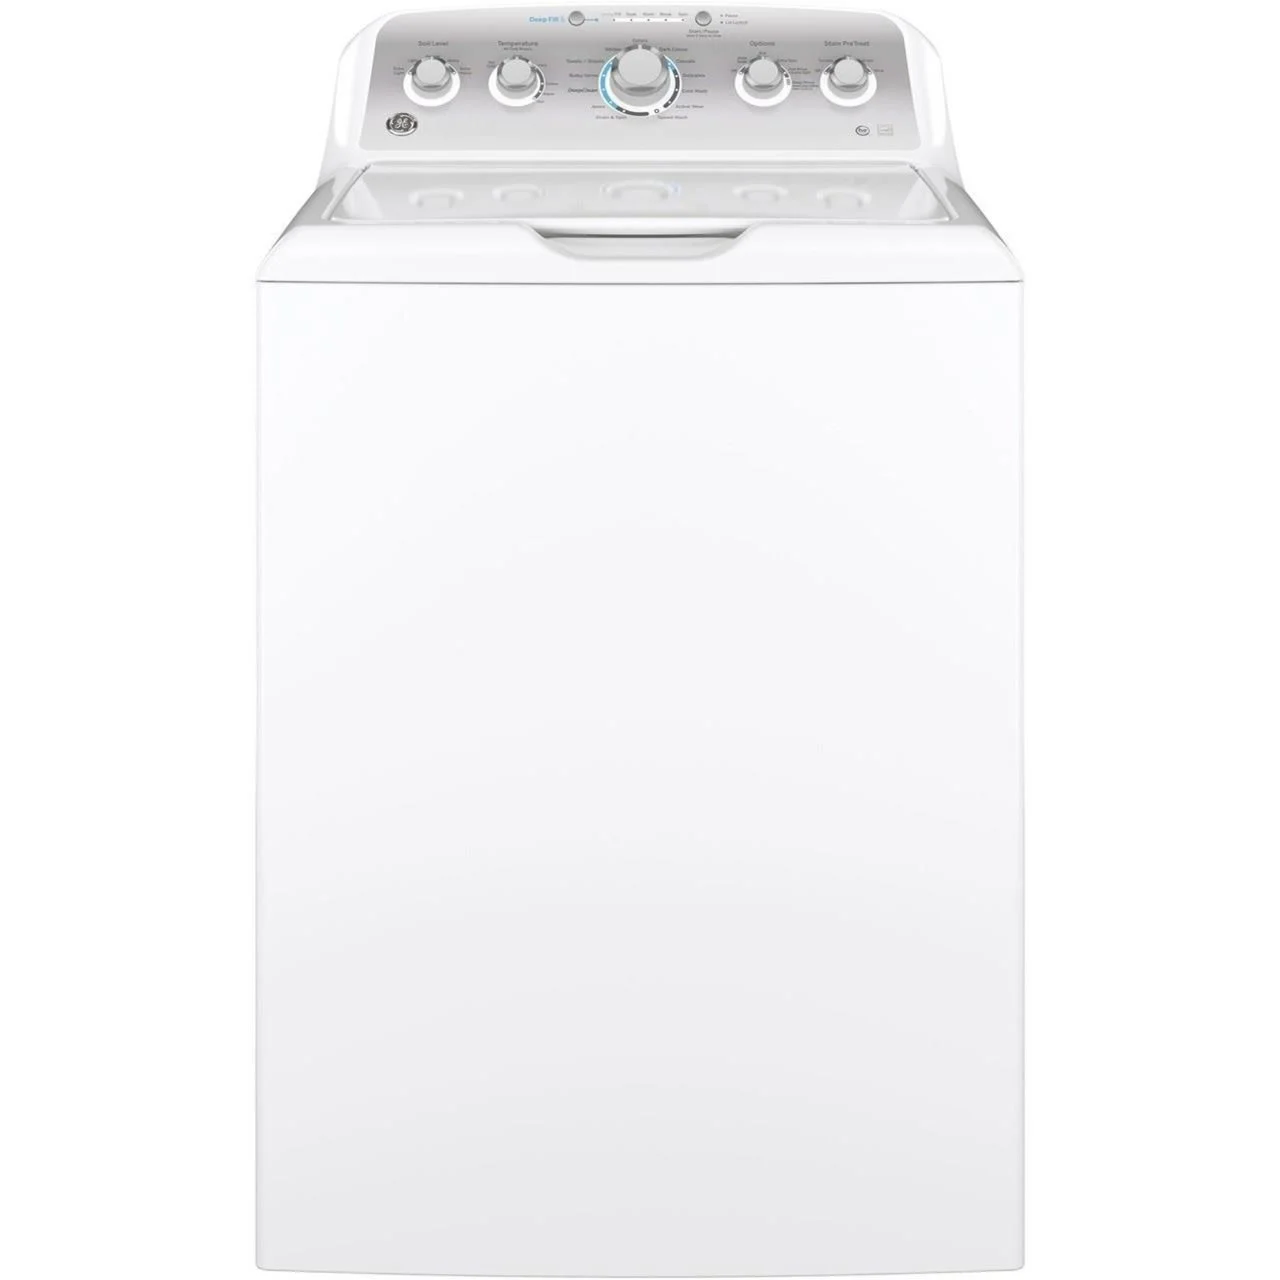 GNW128PSMWW by GE Appliances - GE® Space-Saving 2.8 cu. ft